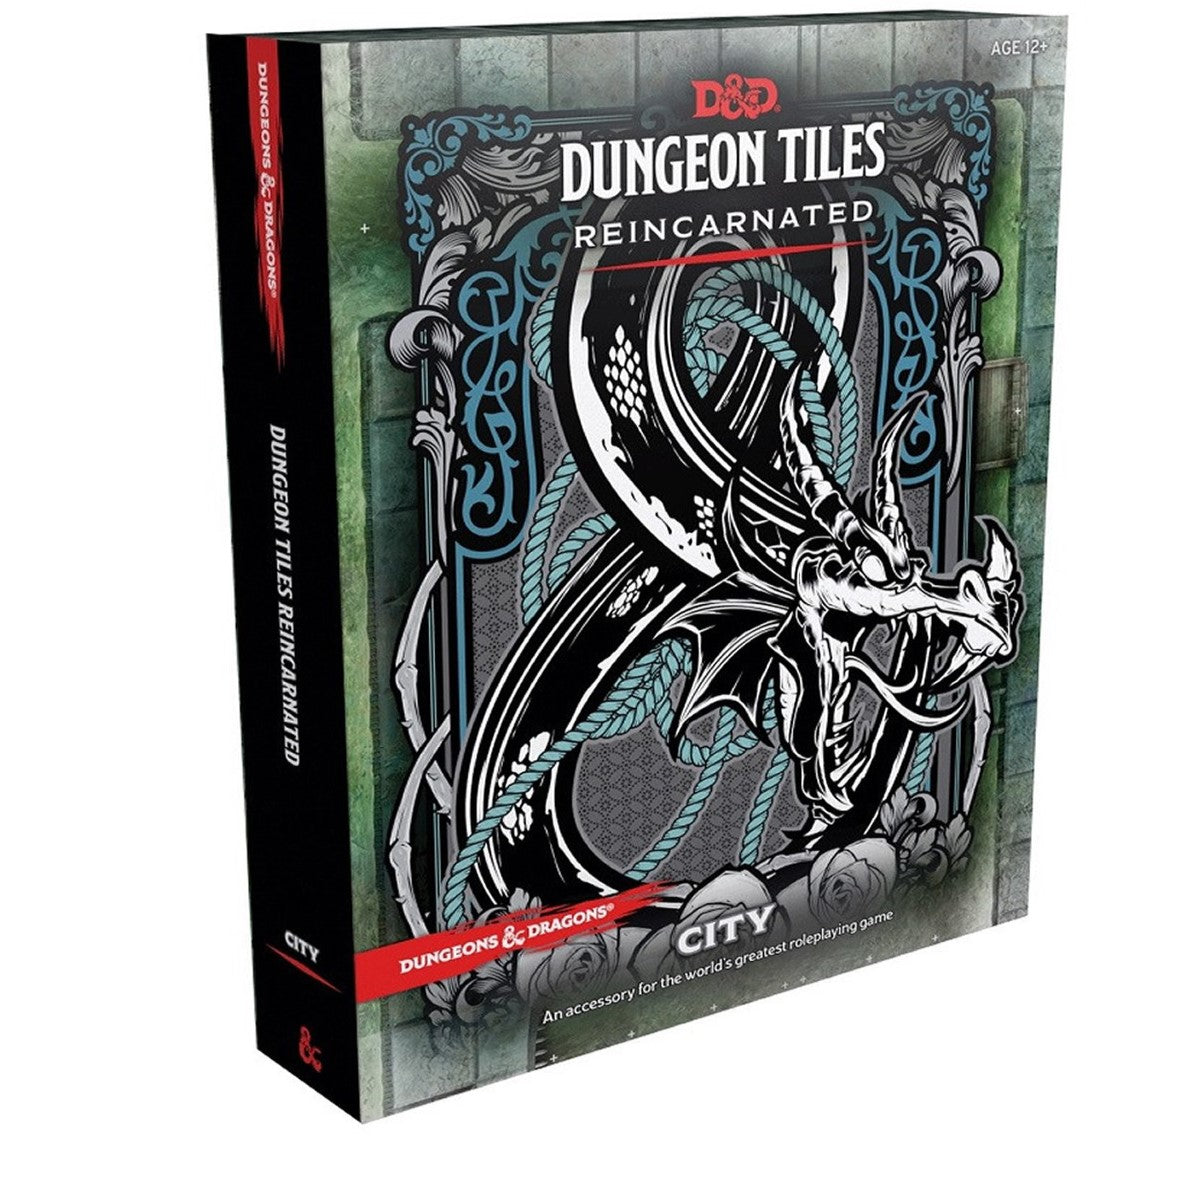 Dungeons and Dragons: Dungeon Tiles Reincarnated - The City